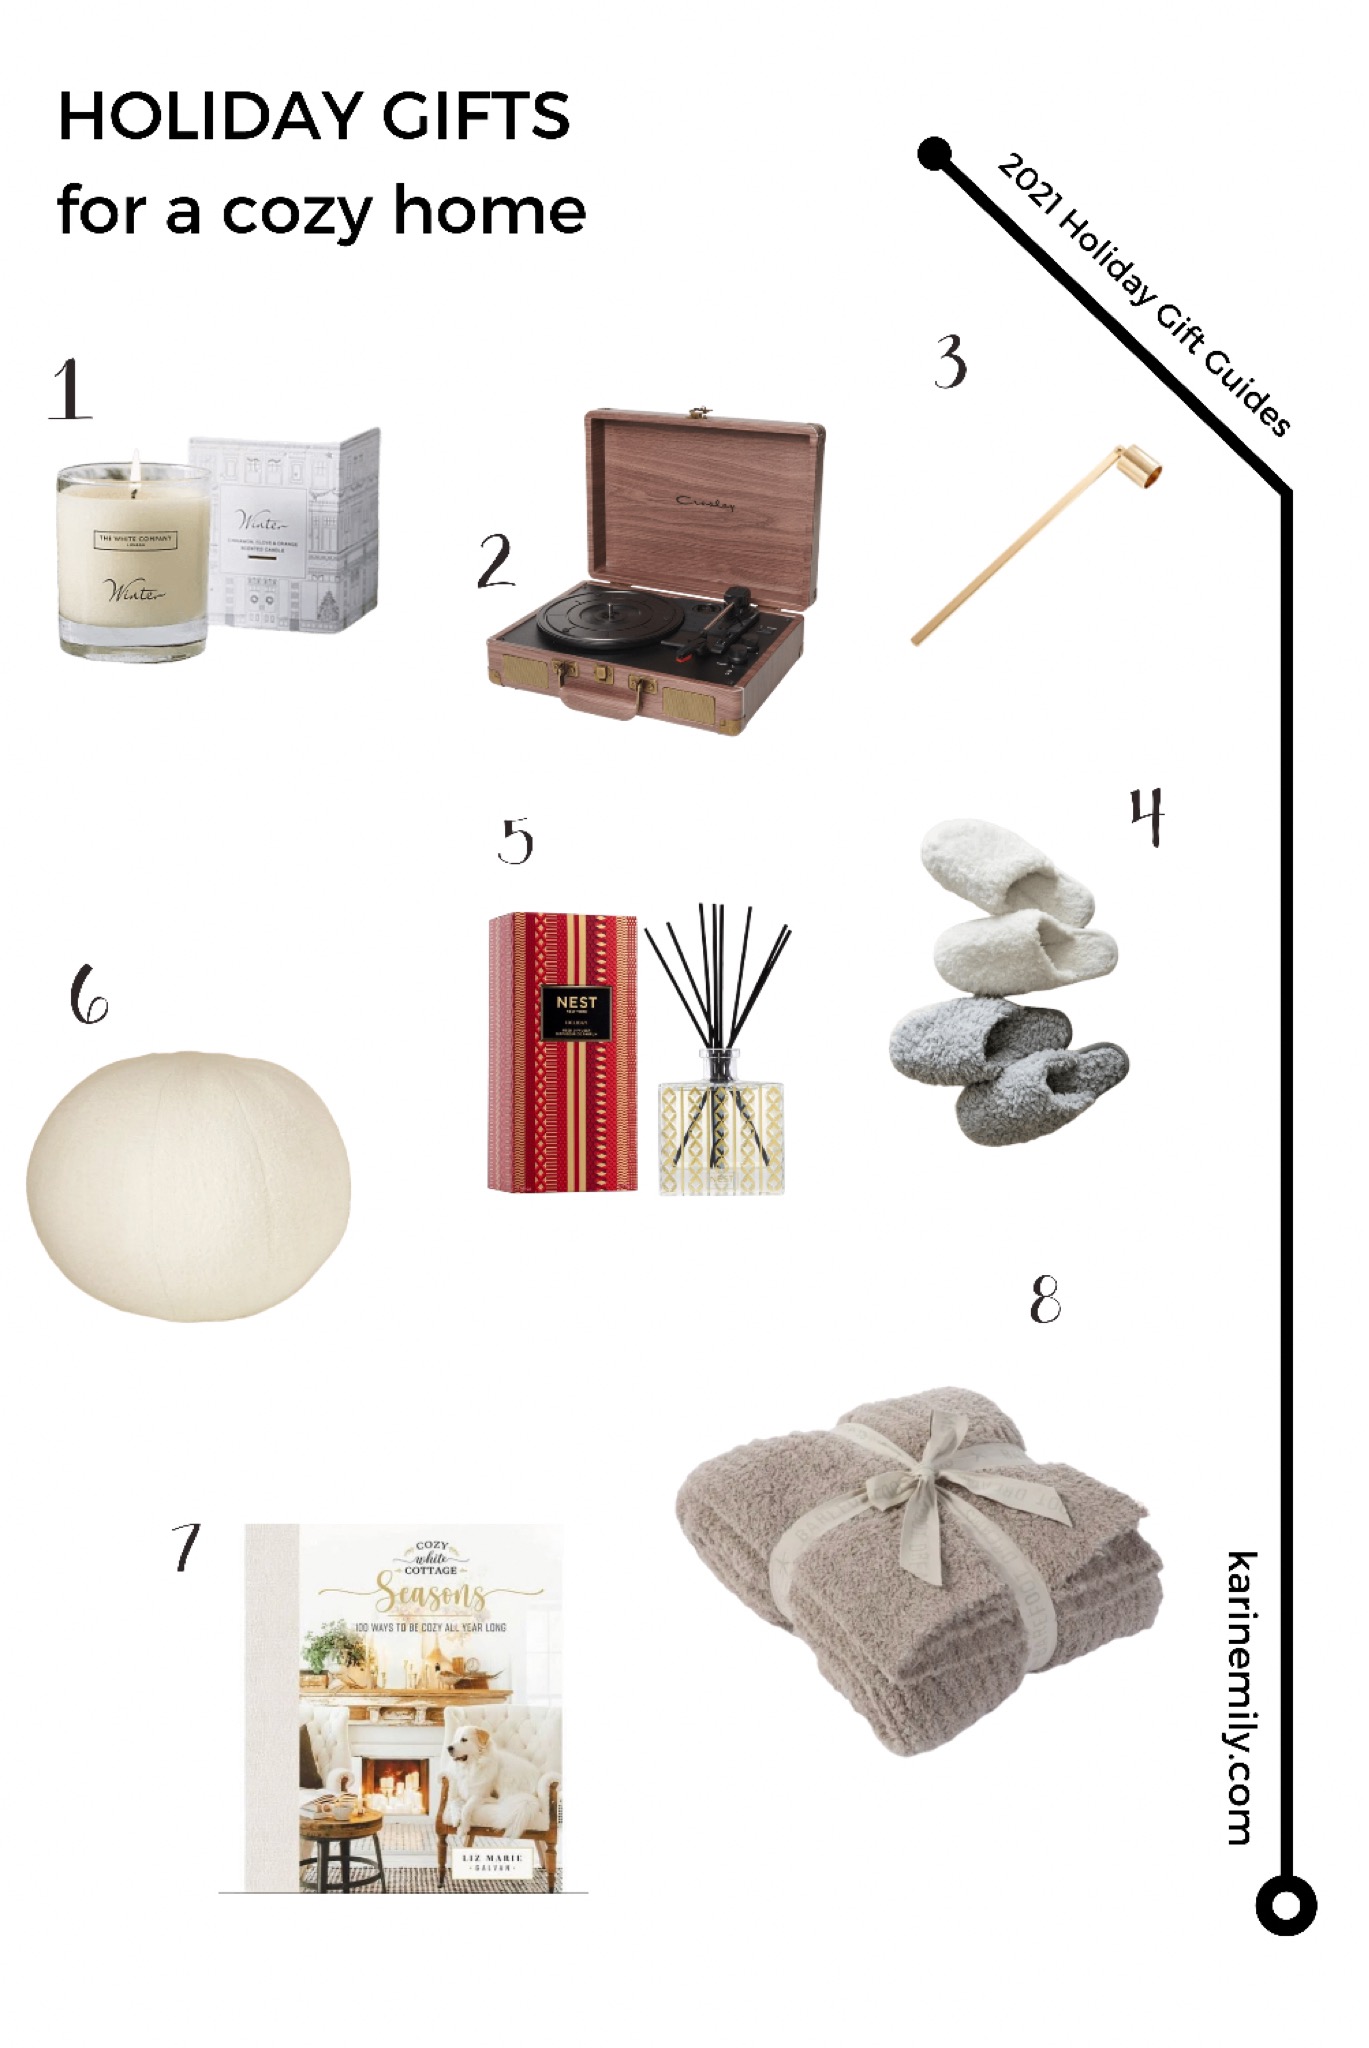 Karin Emily shares her 2021 Cozy Home Holiday Gift Guides